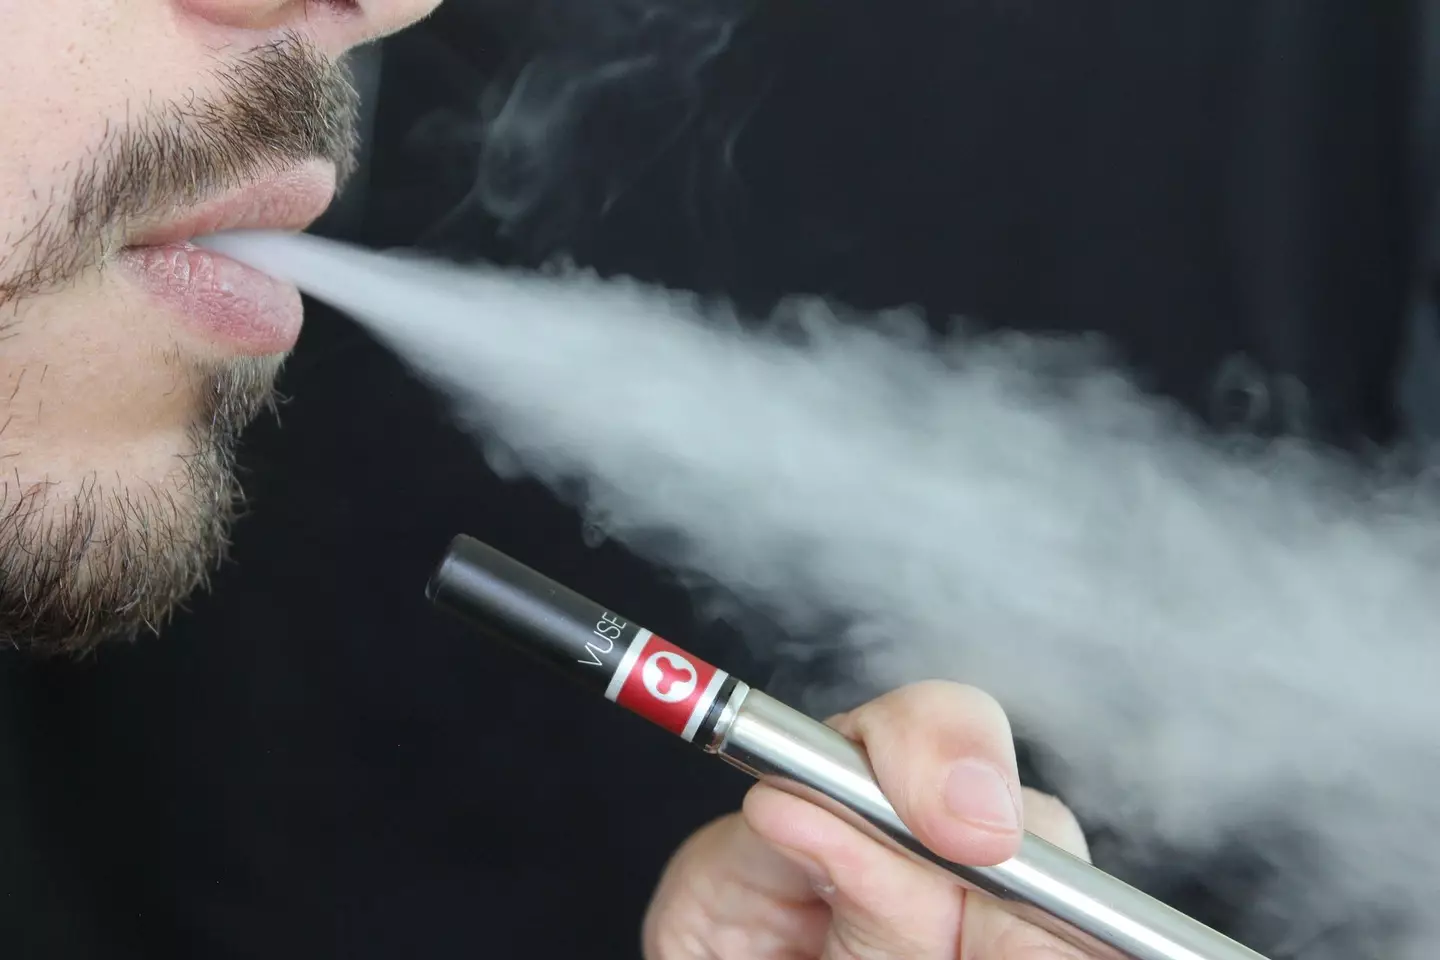 The ban comes following an increase in vape sales.